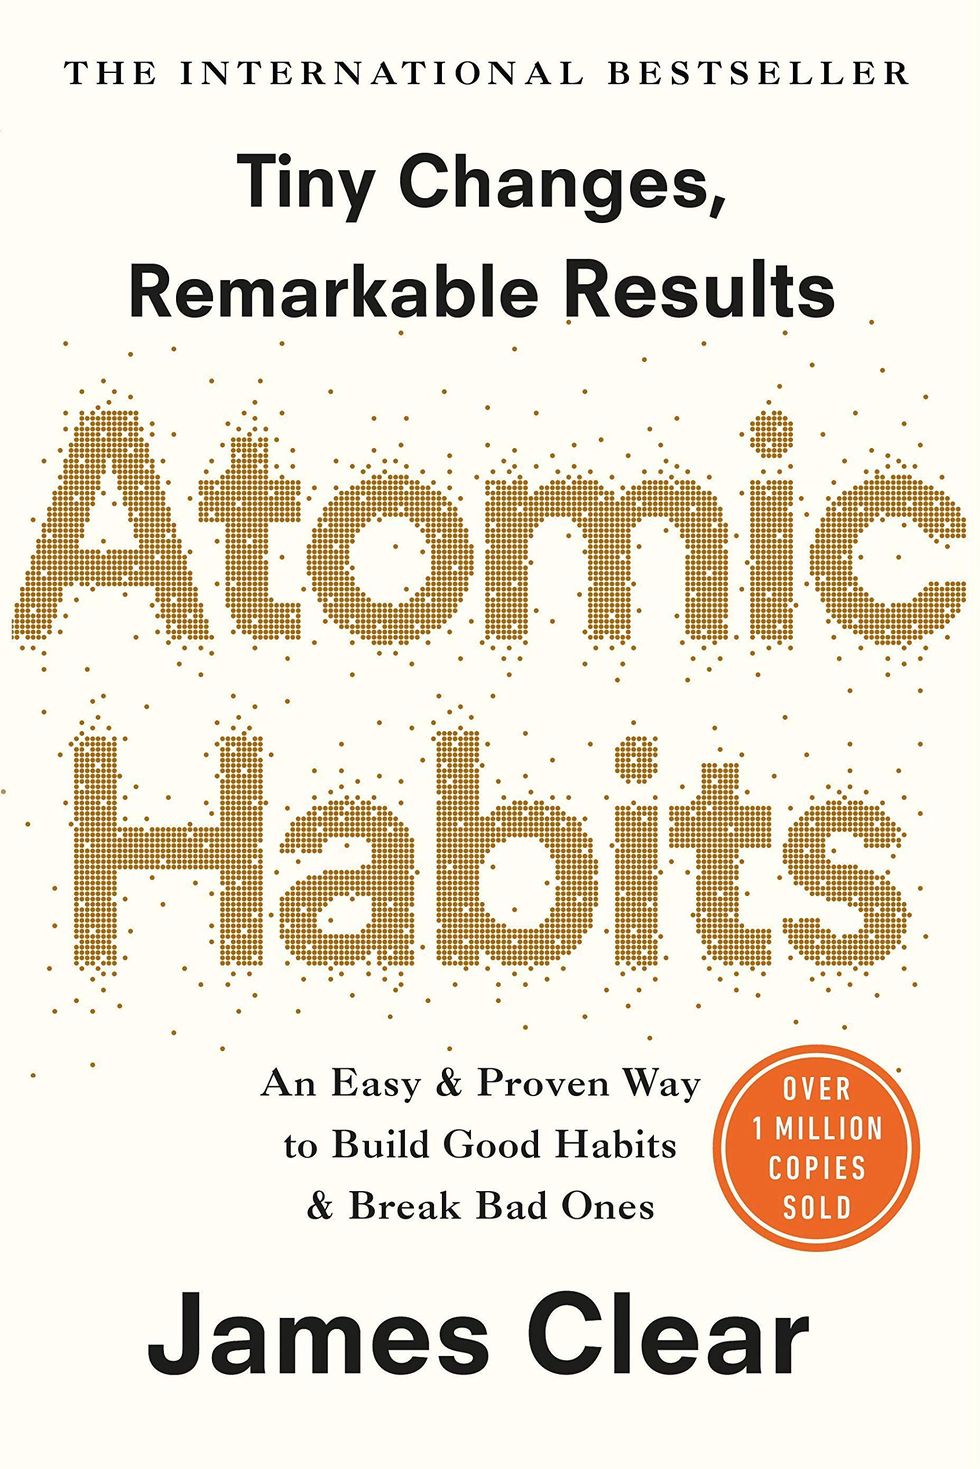 Atomic Habits: An Easy and Proven Way to Build Good Habits and Break Bad Ones